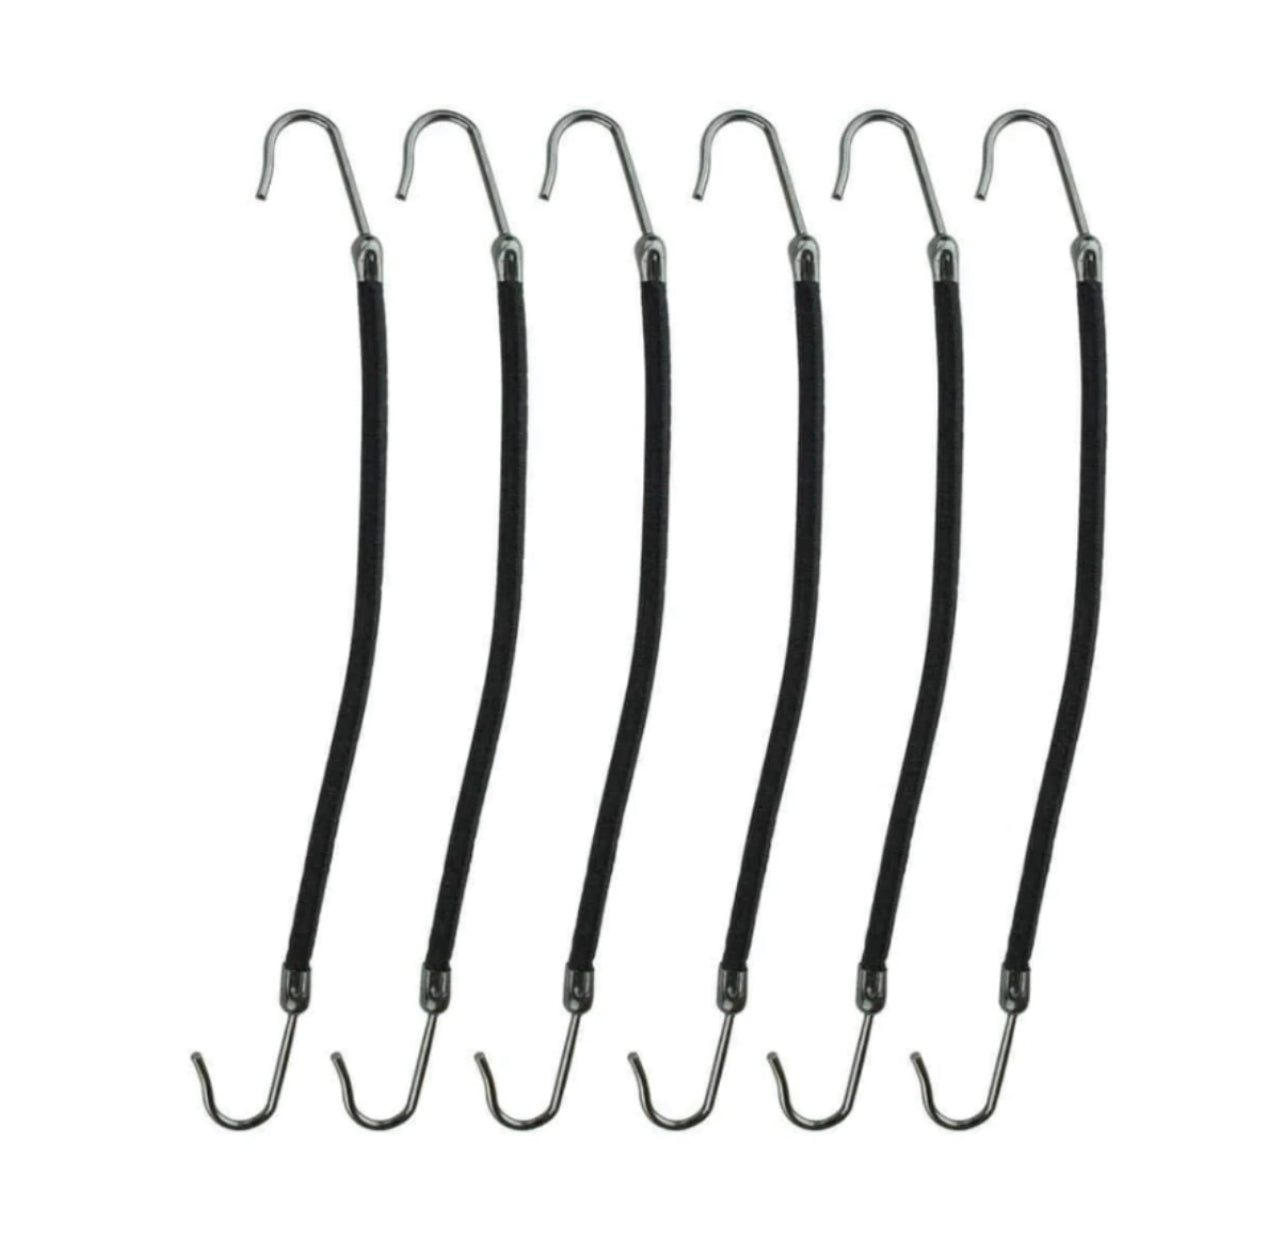 Pink Pewter Bungee Professional Quality Elastics With Hooks - 6pc 5" Black | Phoenix Nationale 